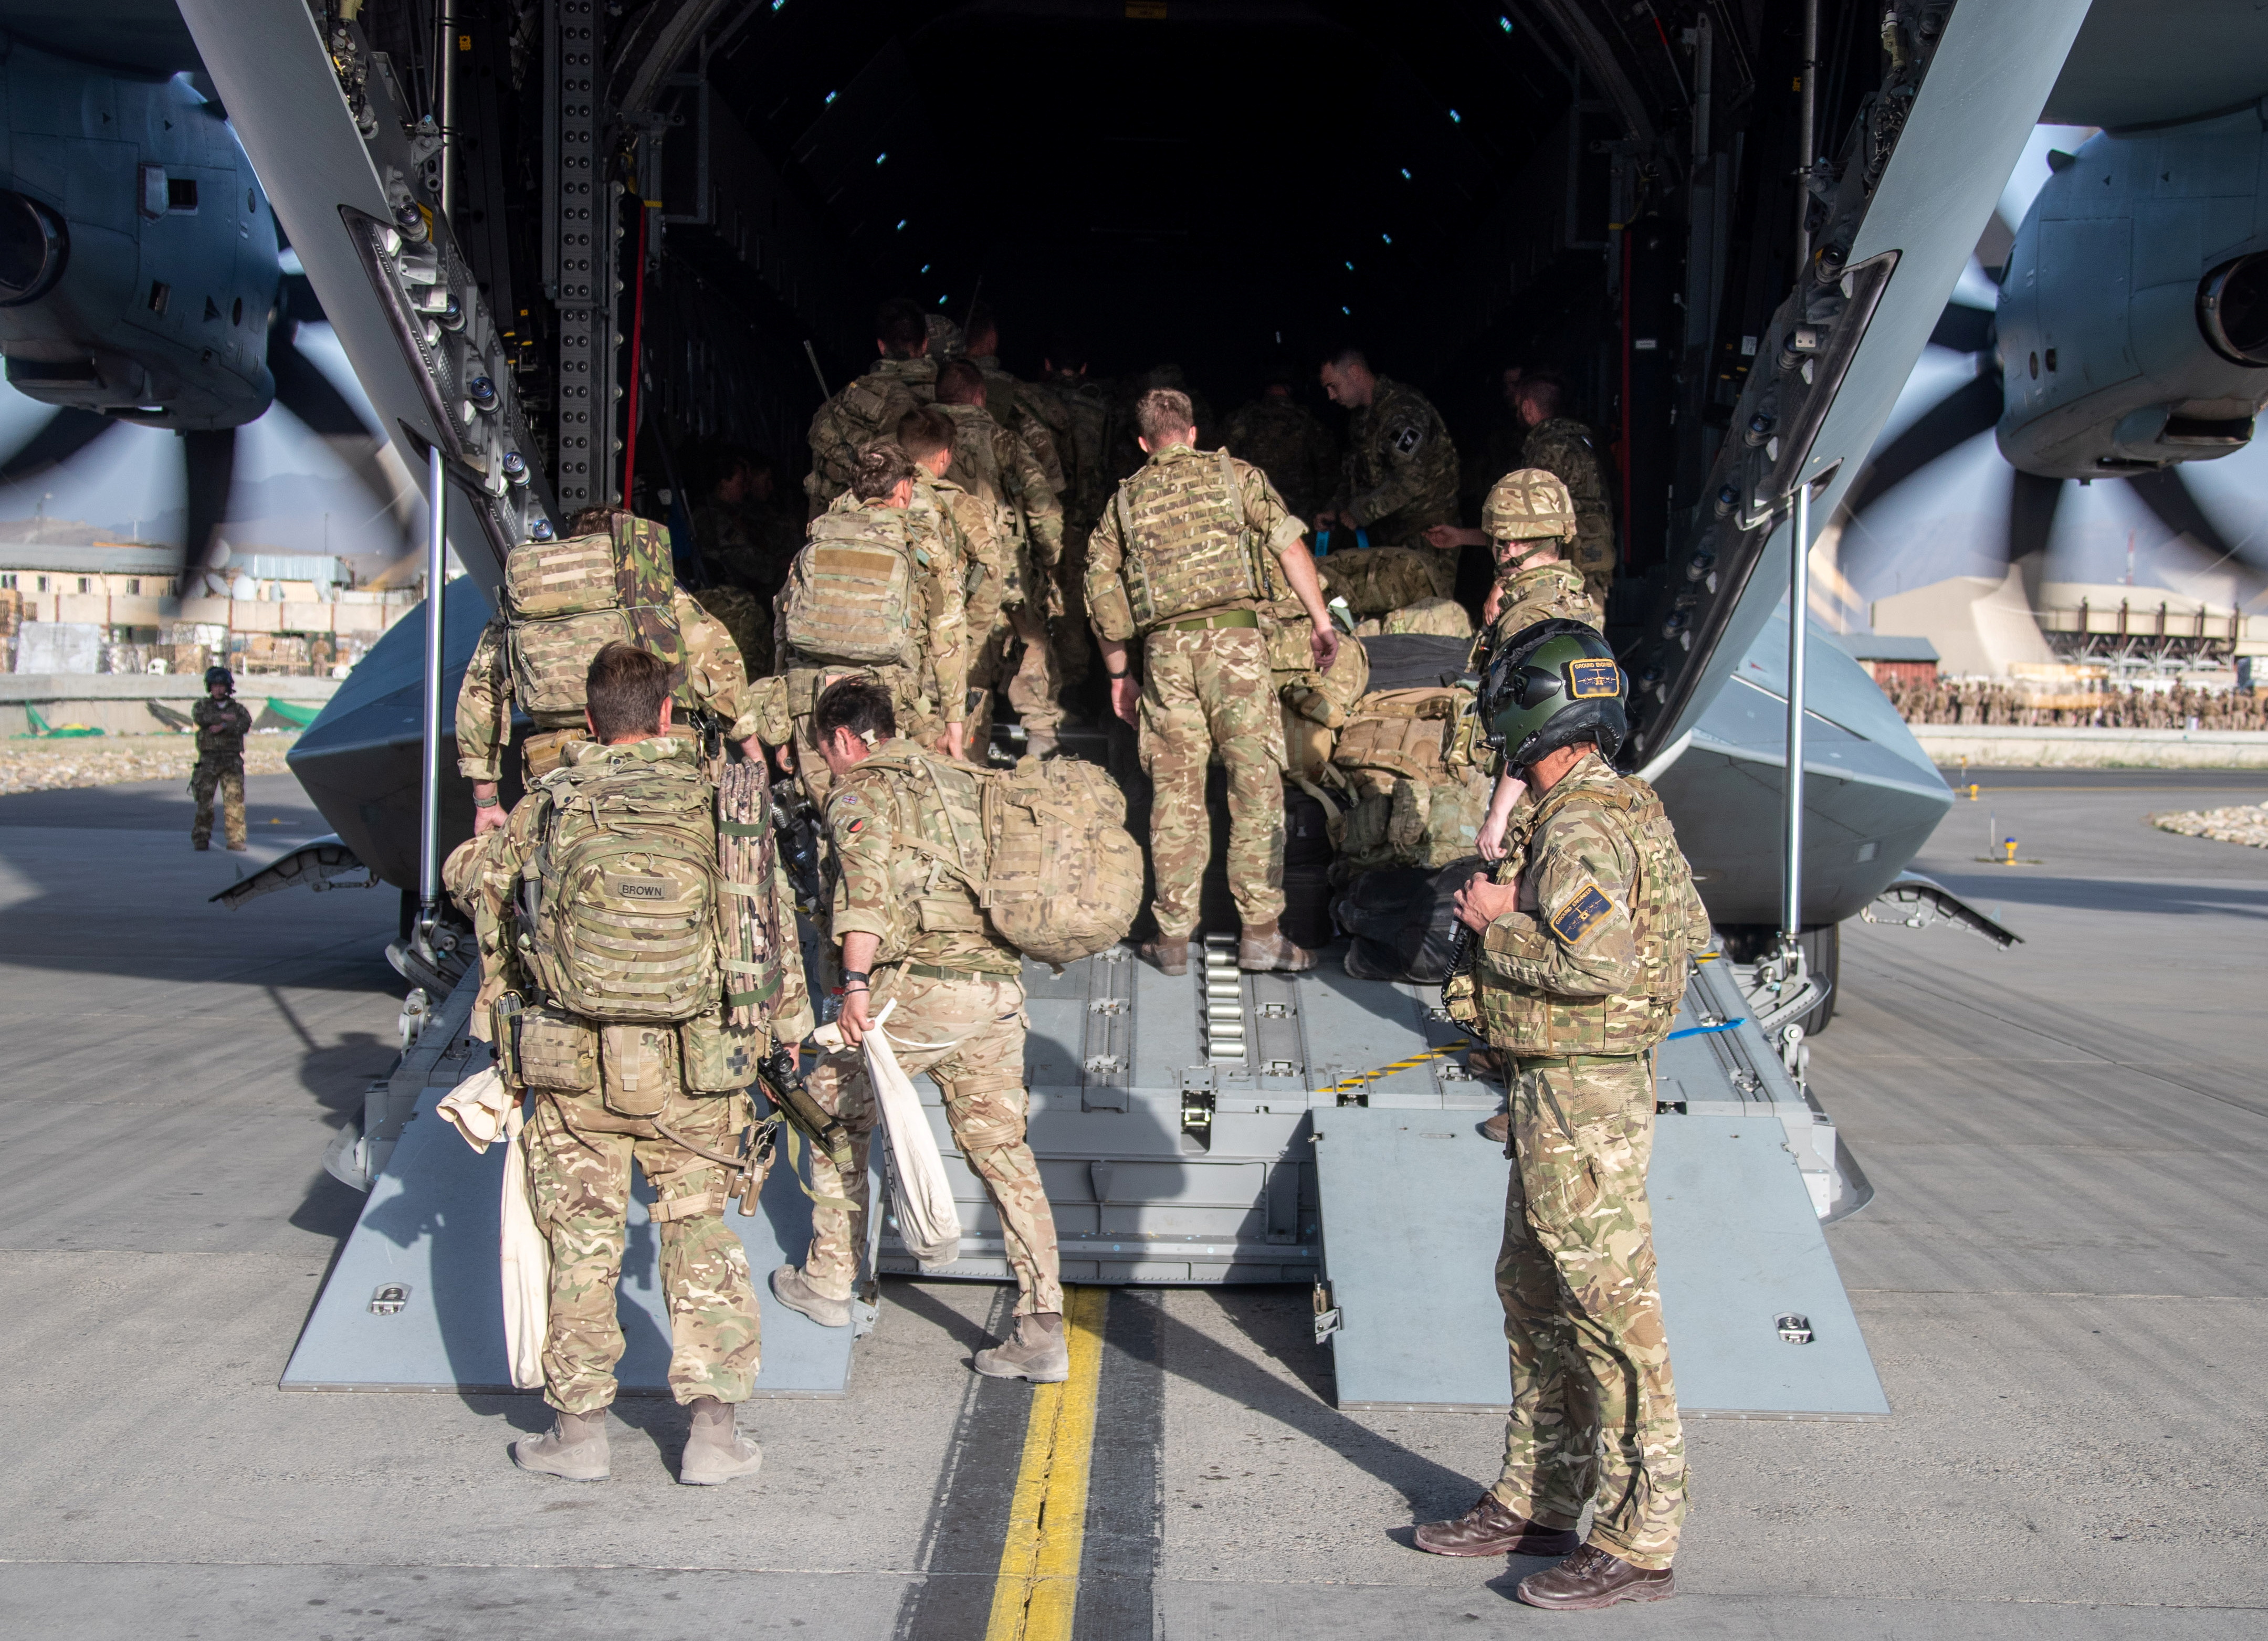 UK military personnel board an A400M aircraft departing Kabul, Afghanistan August 28, 2021.   Jonathan Gifford/UK MOD Crown copyright 2021/Handout via REUTERS 